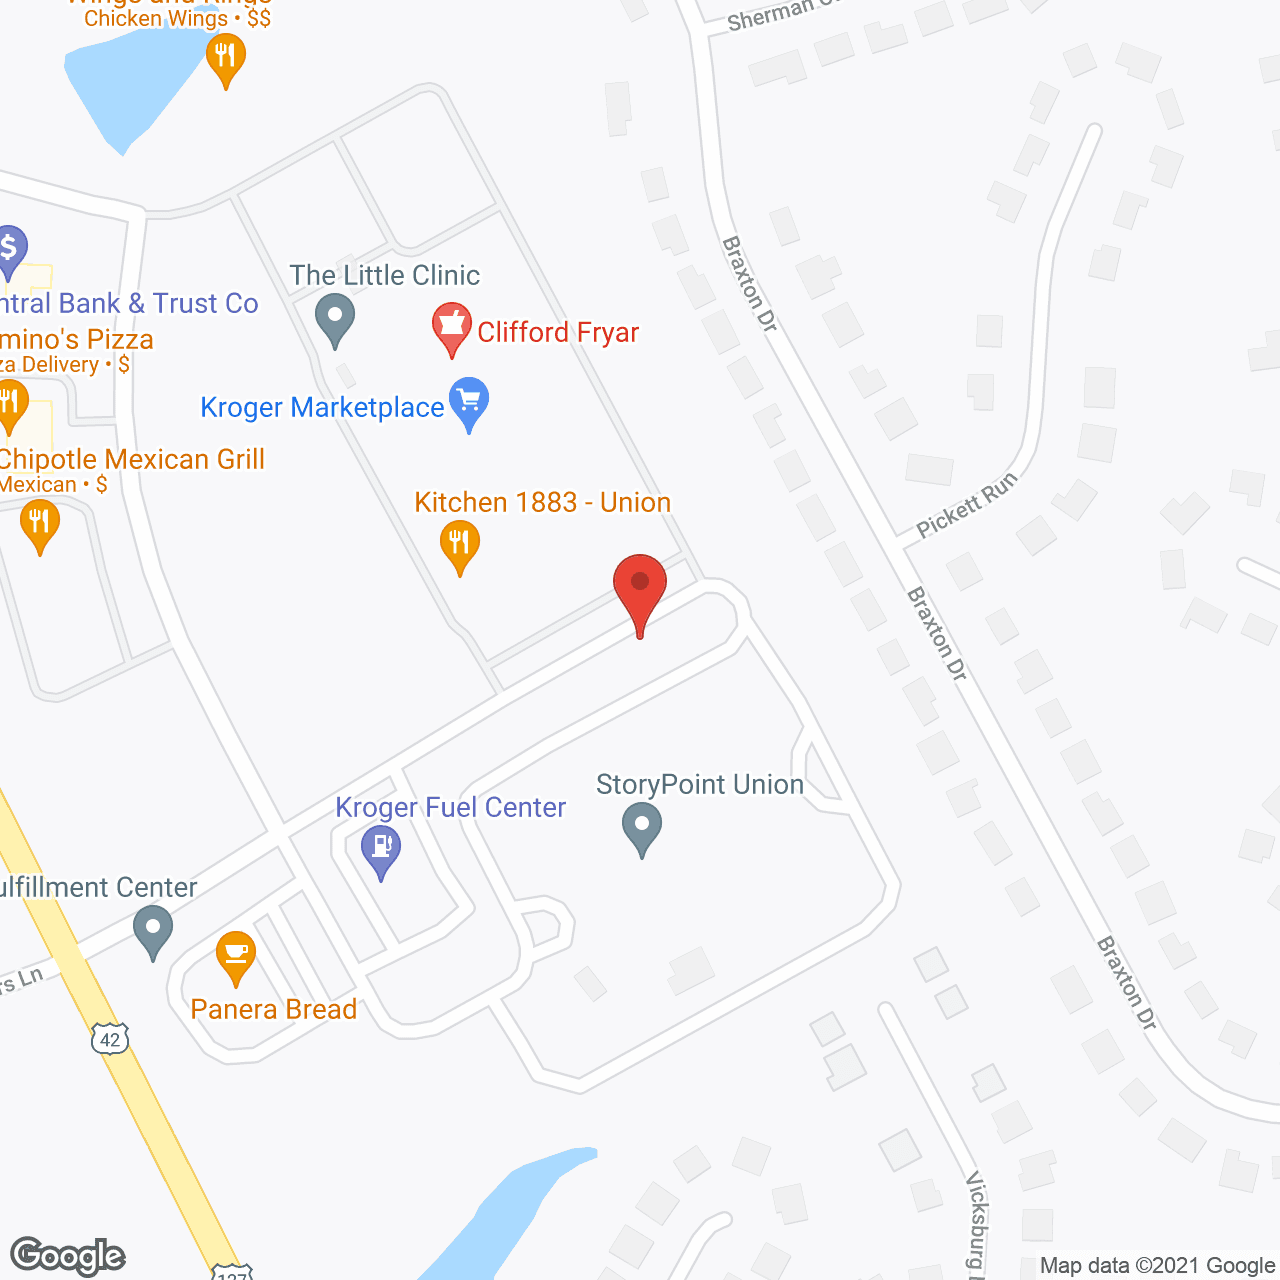 StoryPoint Union in google map